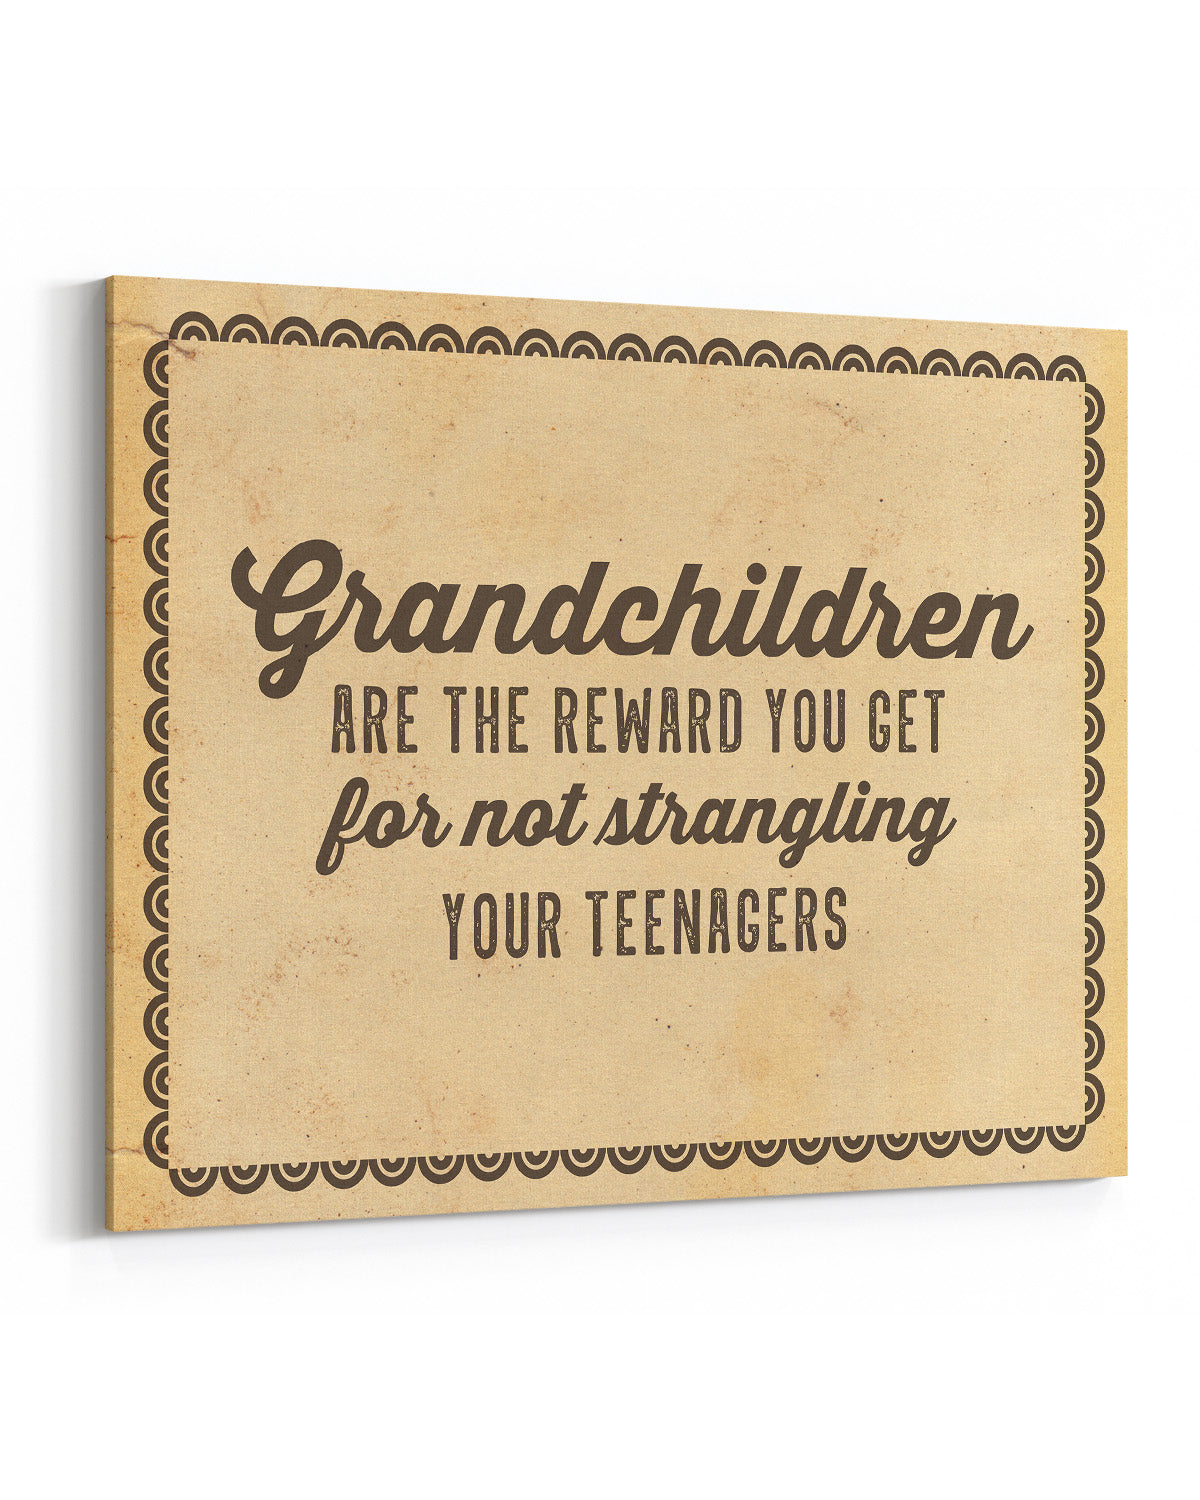 Grandparents Wall Art from Grandkids - Grandparents Day Gift Ideas - Best Gifts for Grandparents Wall Decor - Funny Grandparent Gift - Gifts for Grandparents